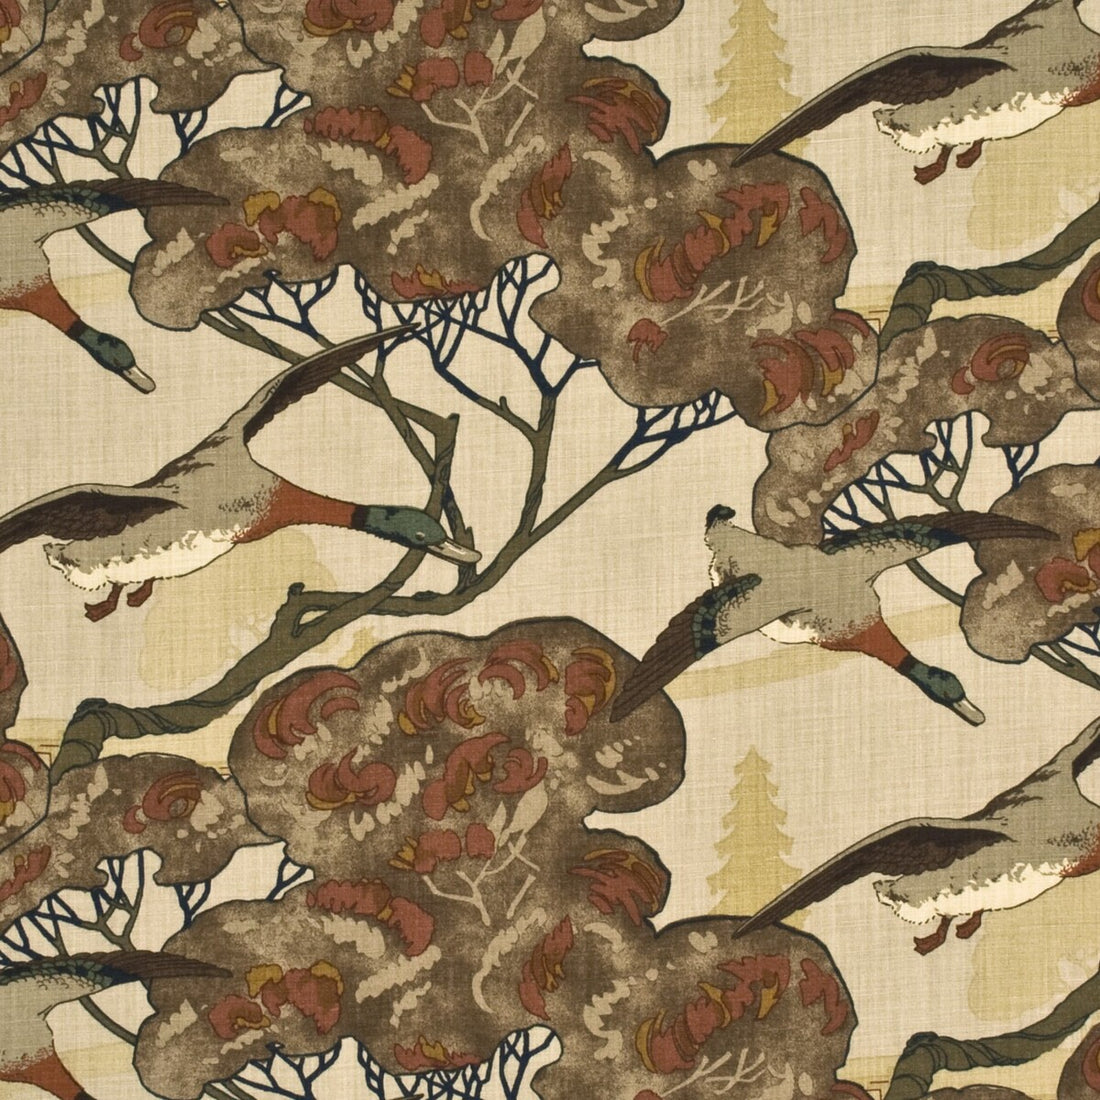 Flying Ducks fabric in stone/brown color - pattern FD205.K47.0 - by Mulberry in the Grand Tour collection